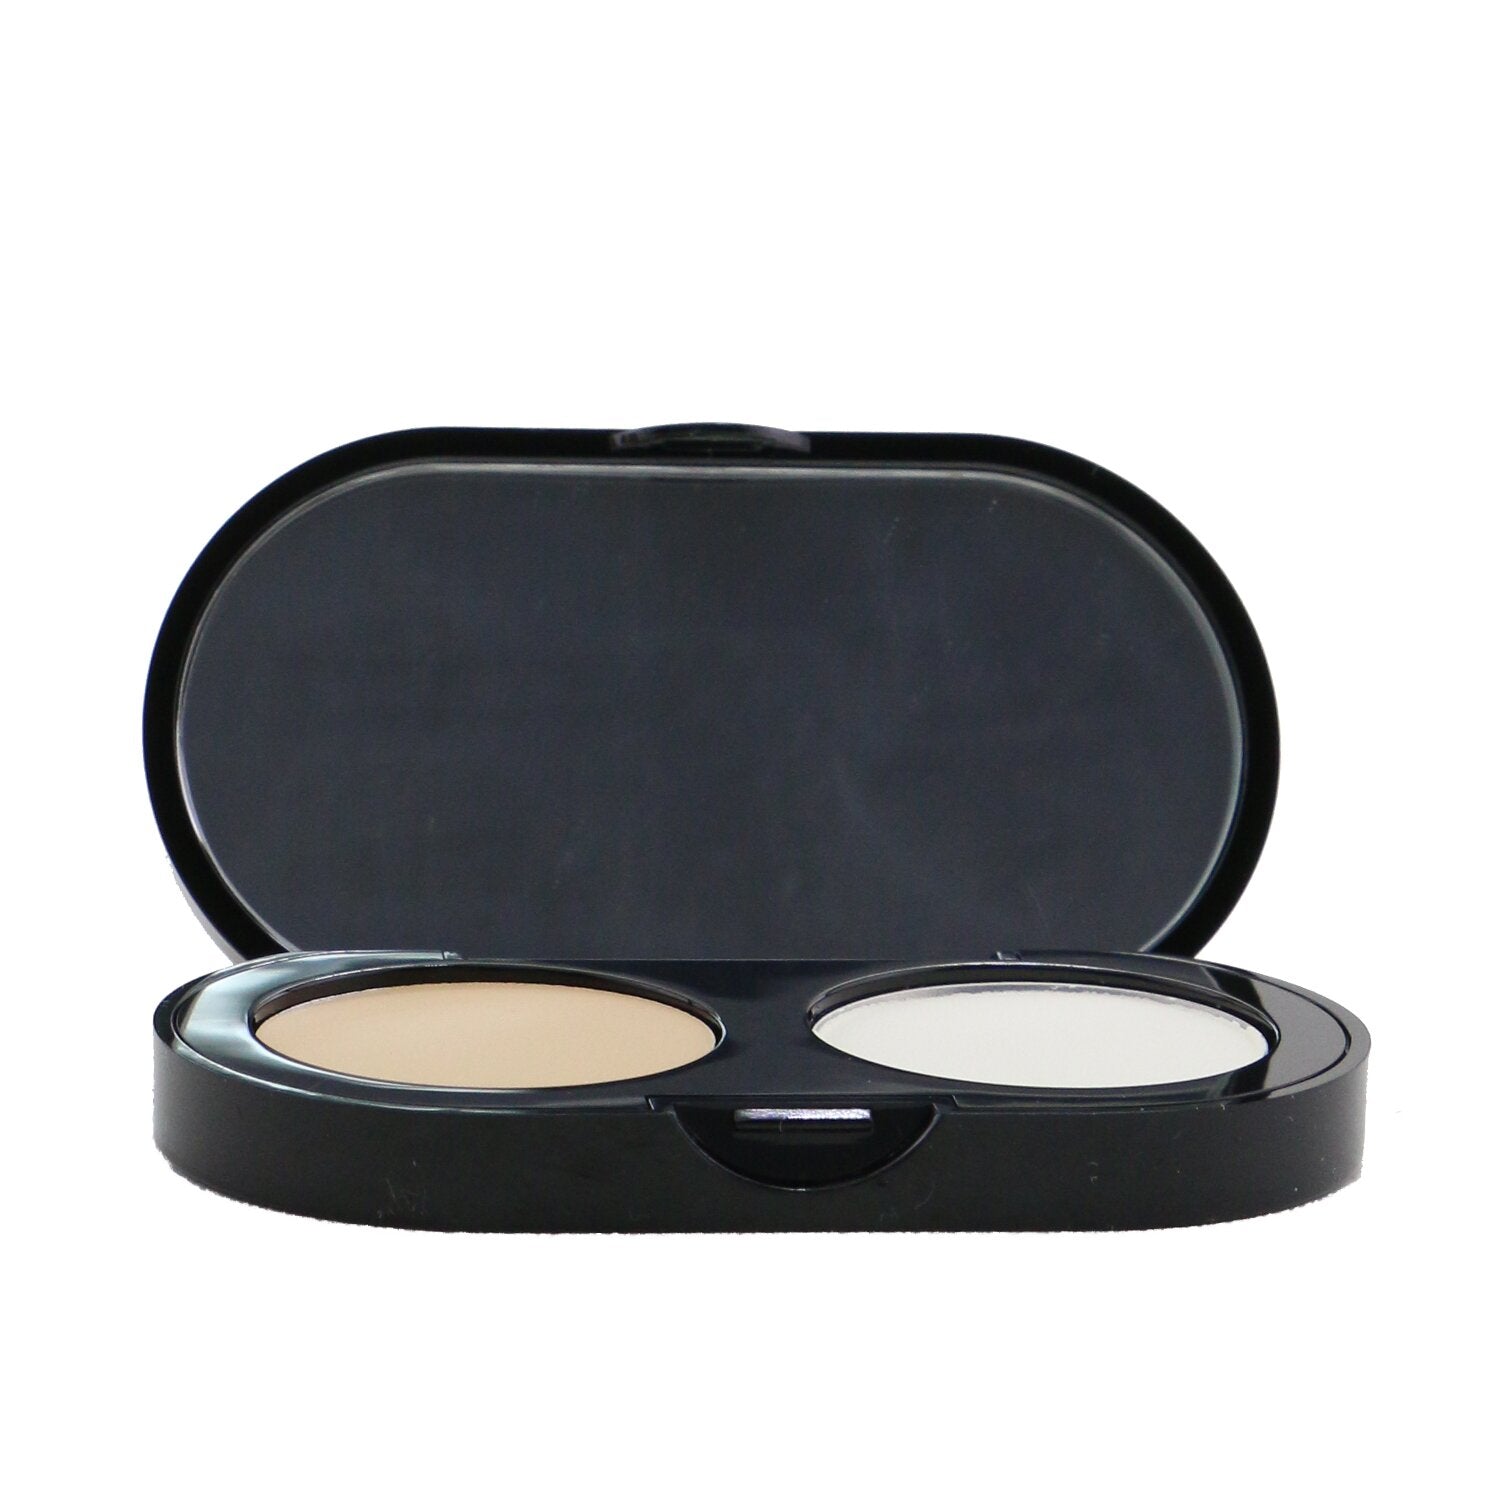 New Creamy Concealer Kit - Porcelain Creamy Concealer White Sheer Finish Pressed Powder for Sale | Bobbi Brown, Up, Now Author